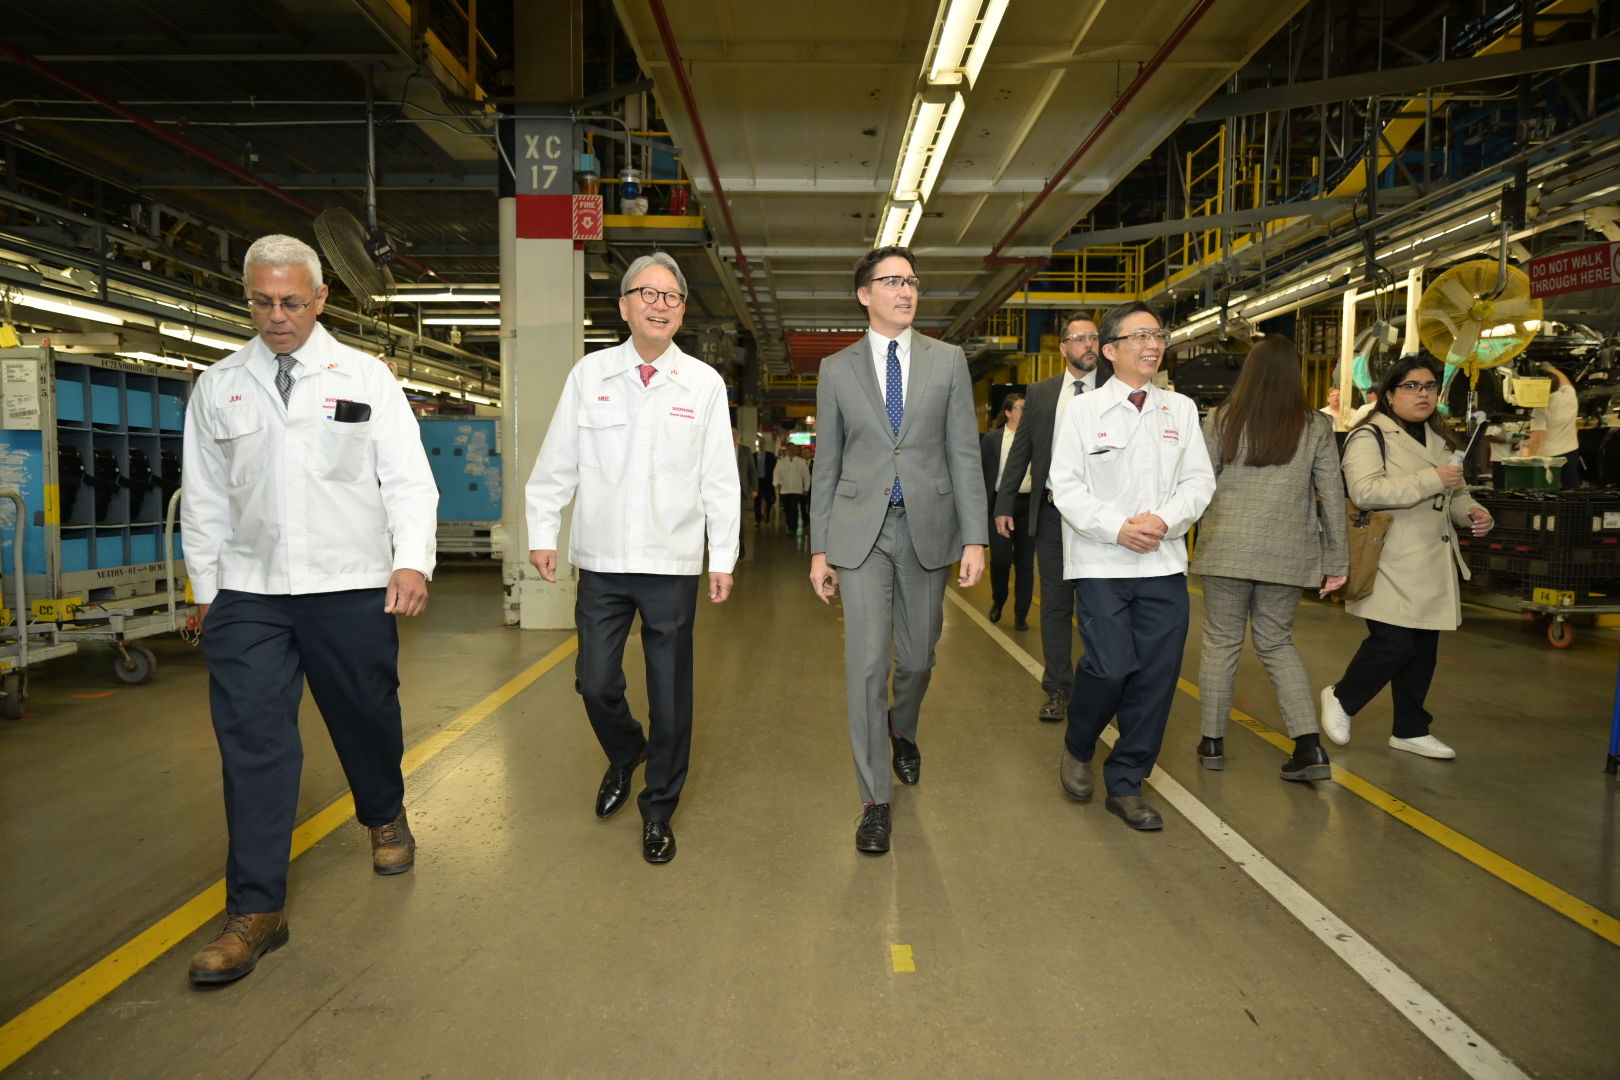 The Right Honourable Justin Trudeau, Prime Minister of Canada (centre) walks with Toshihiro Mibe, President and CEO of Honda Motor Co. (second from left), at Honda of Canada Mfg., where the company announced a $15-billion investment to build a comprehensive electric vehicle value chain in Canada.